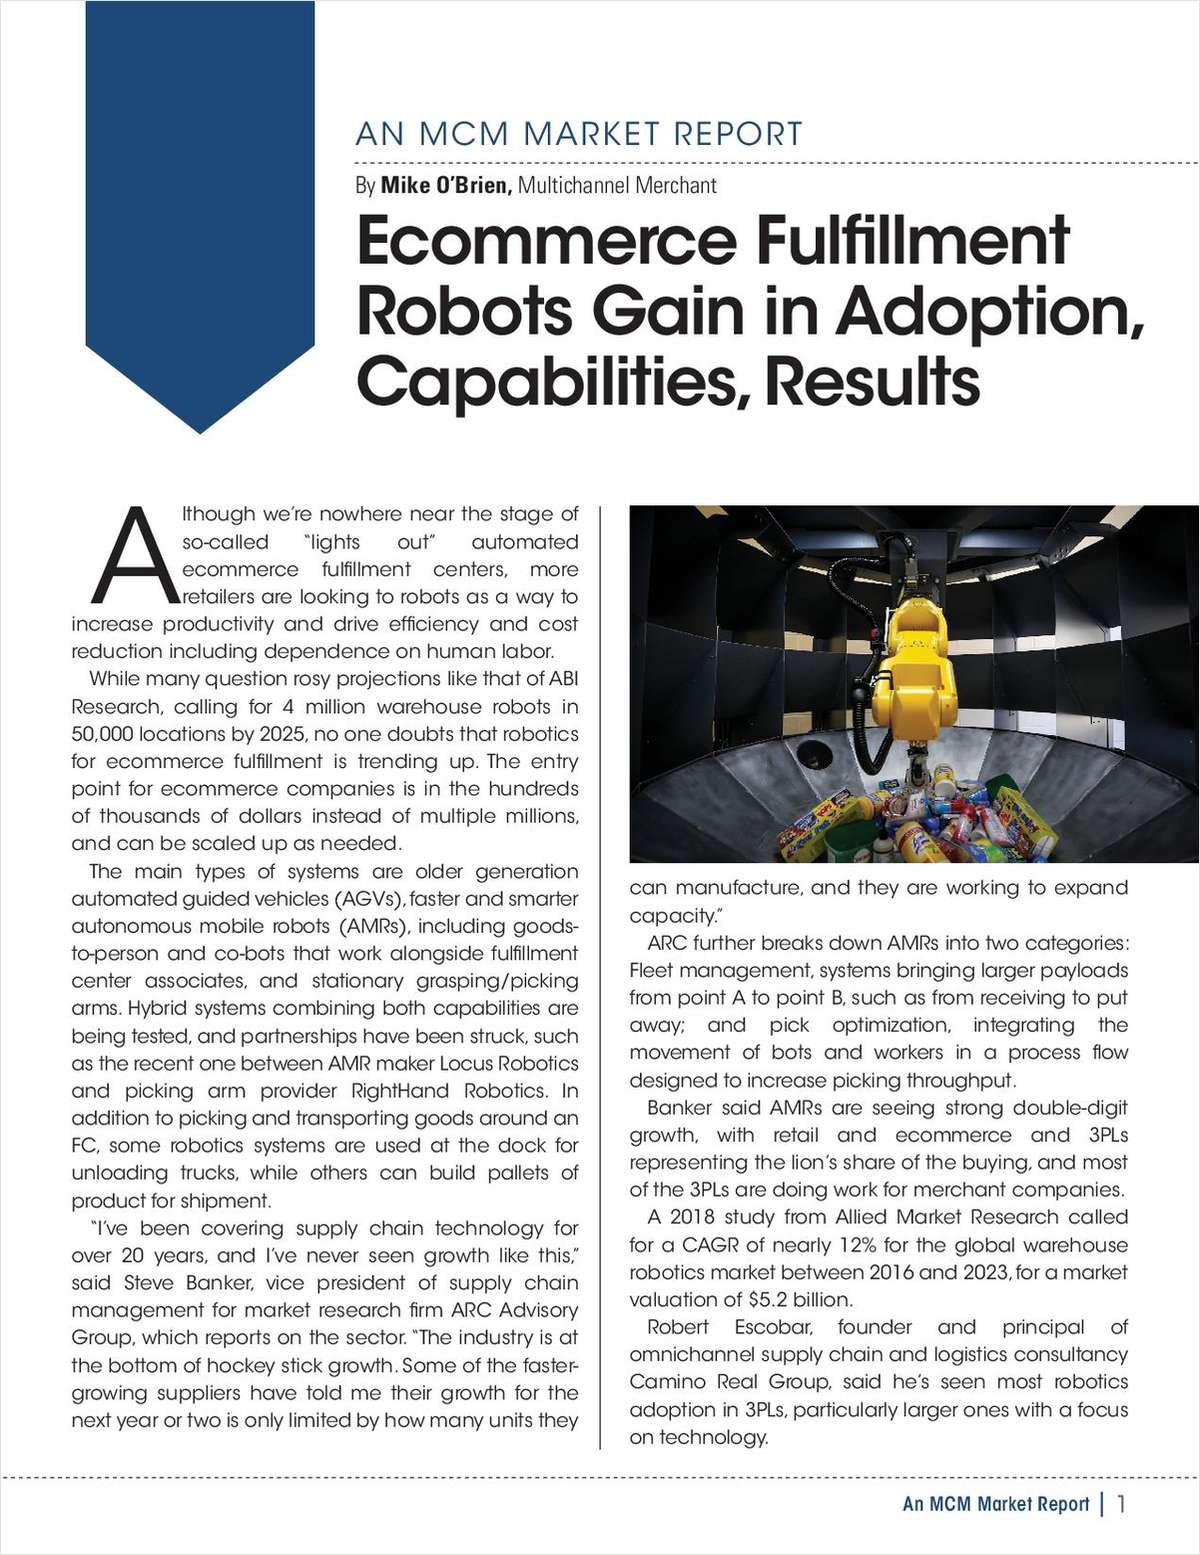 Capabilities, Adoption Growing for Ecommerce Fulfillment Robots